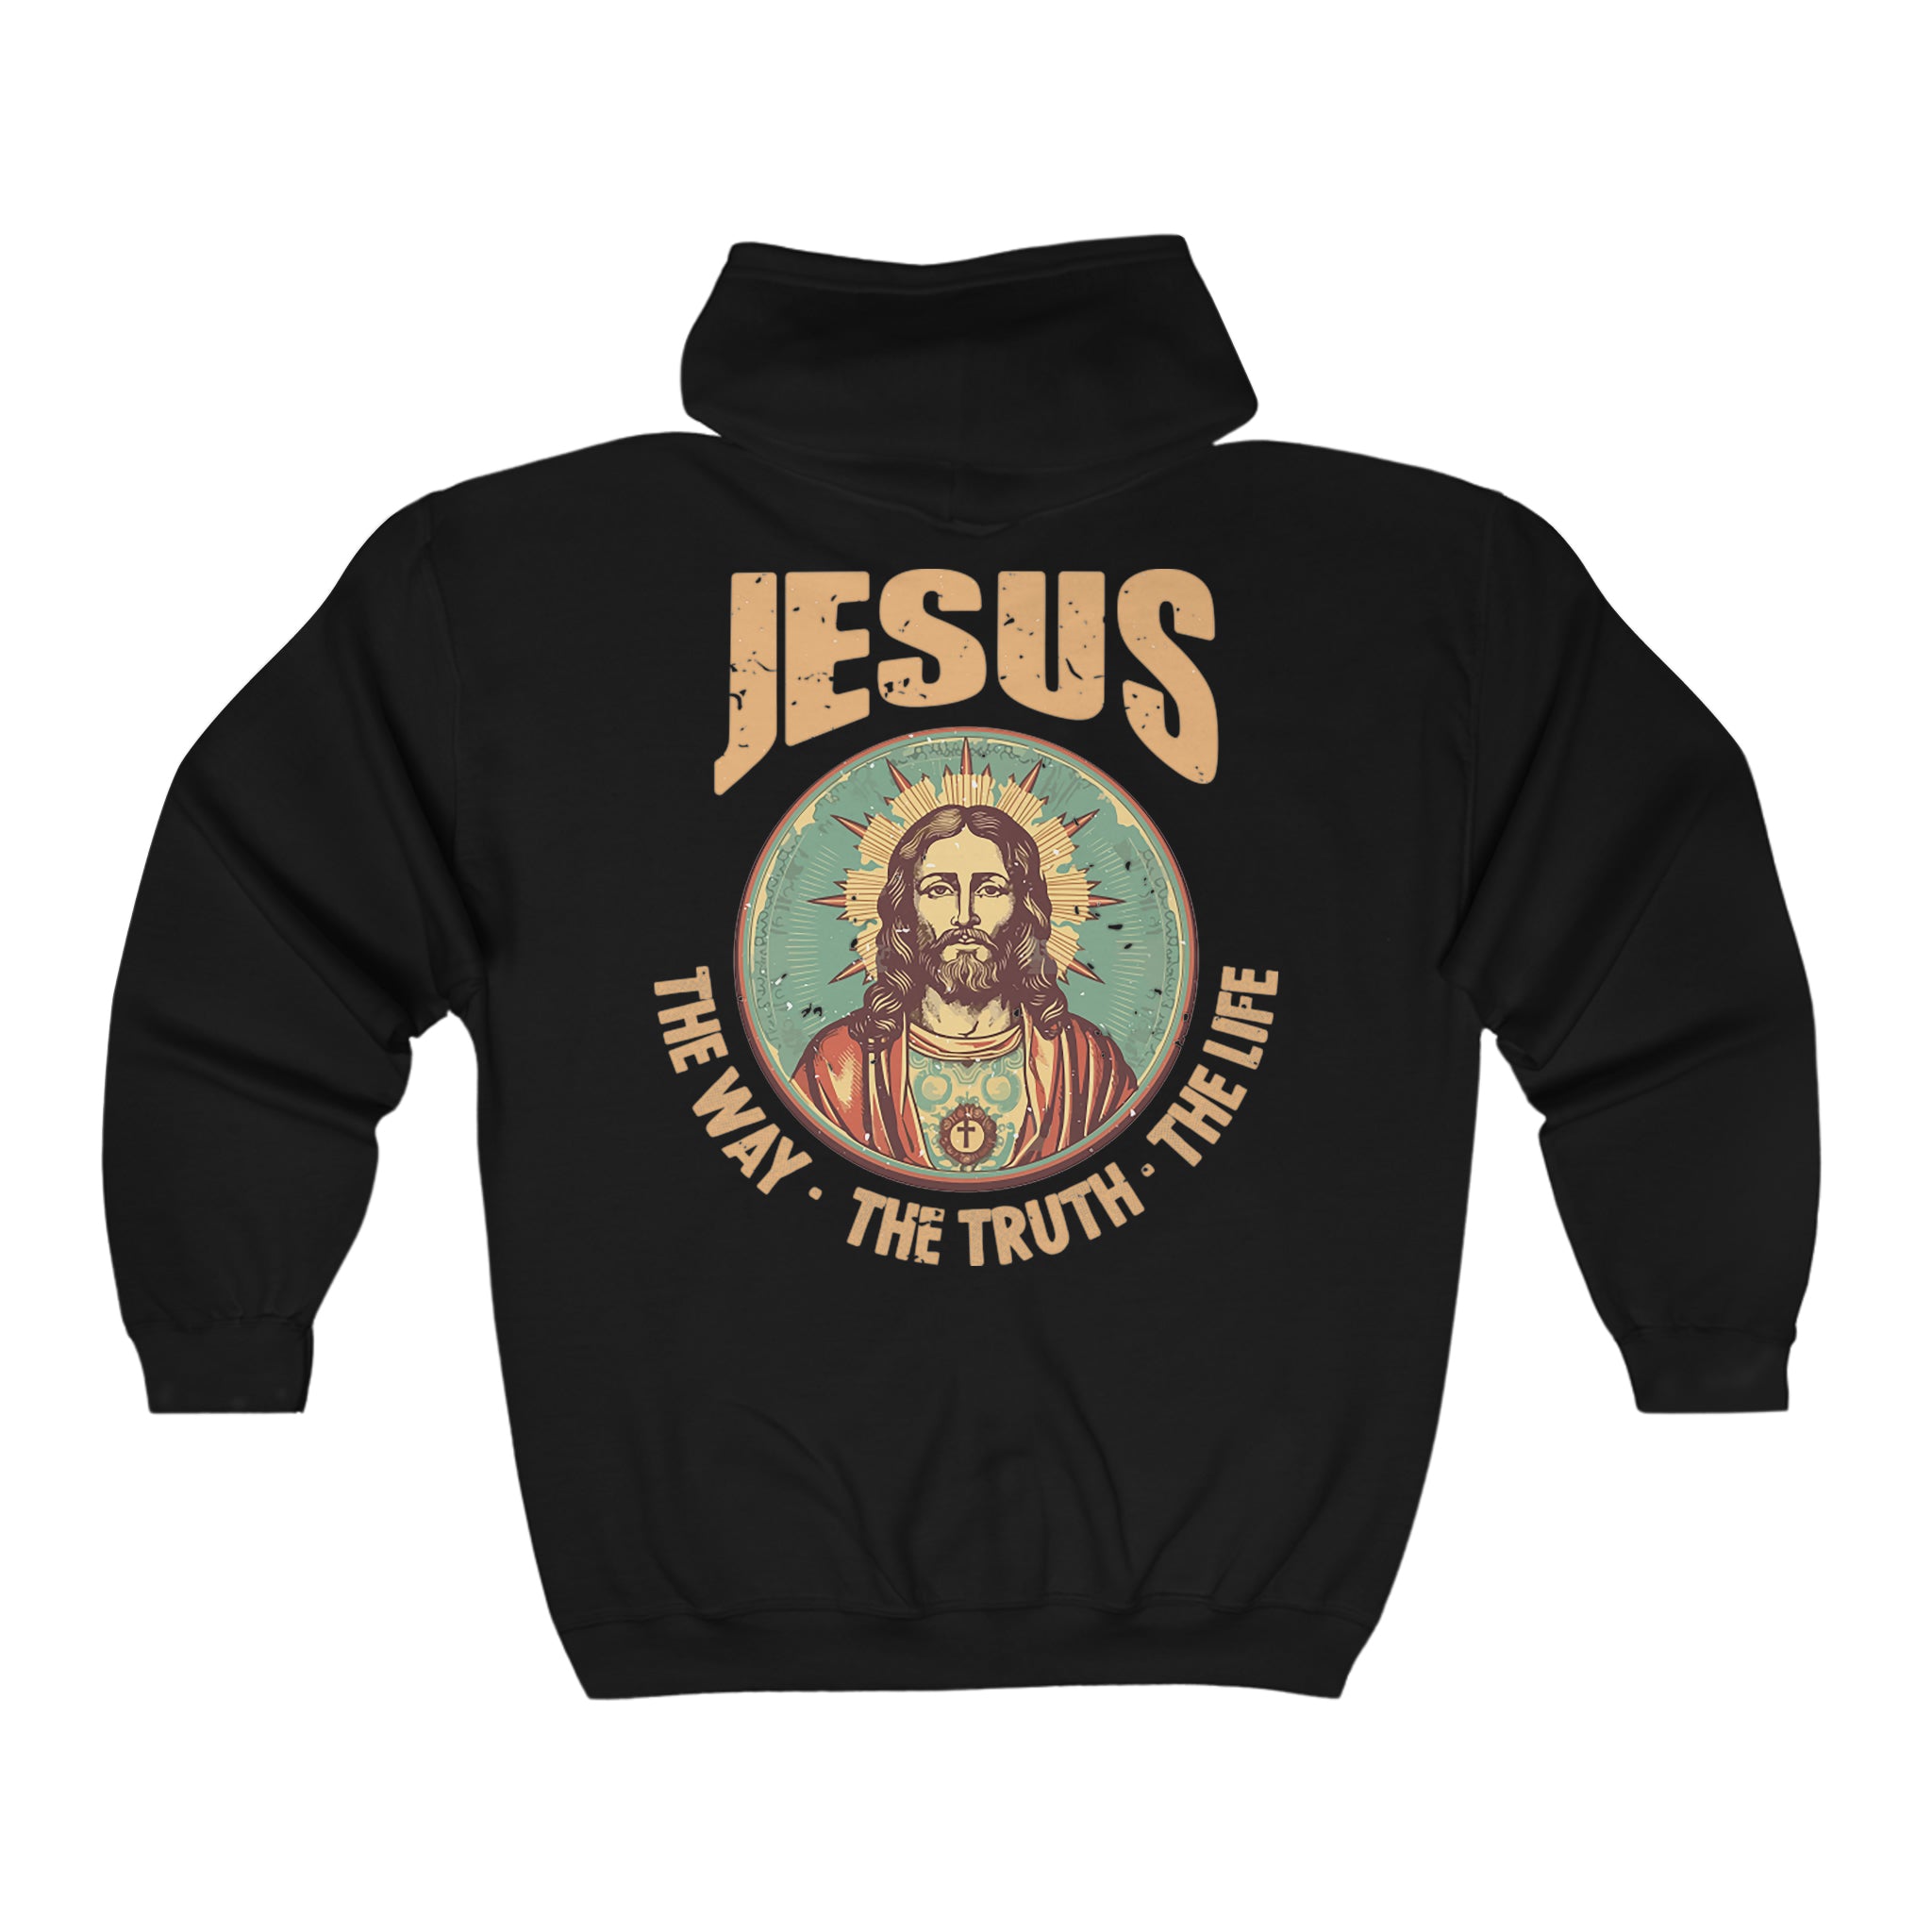 Jesus - The Way, Truth, Life Retro-Inspired Premium Men's Jacket Heavy Blend™ Hooded Size: S Color: Black Jesus Passion Apparel